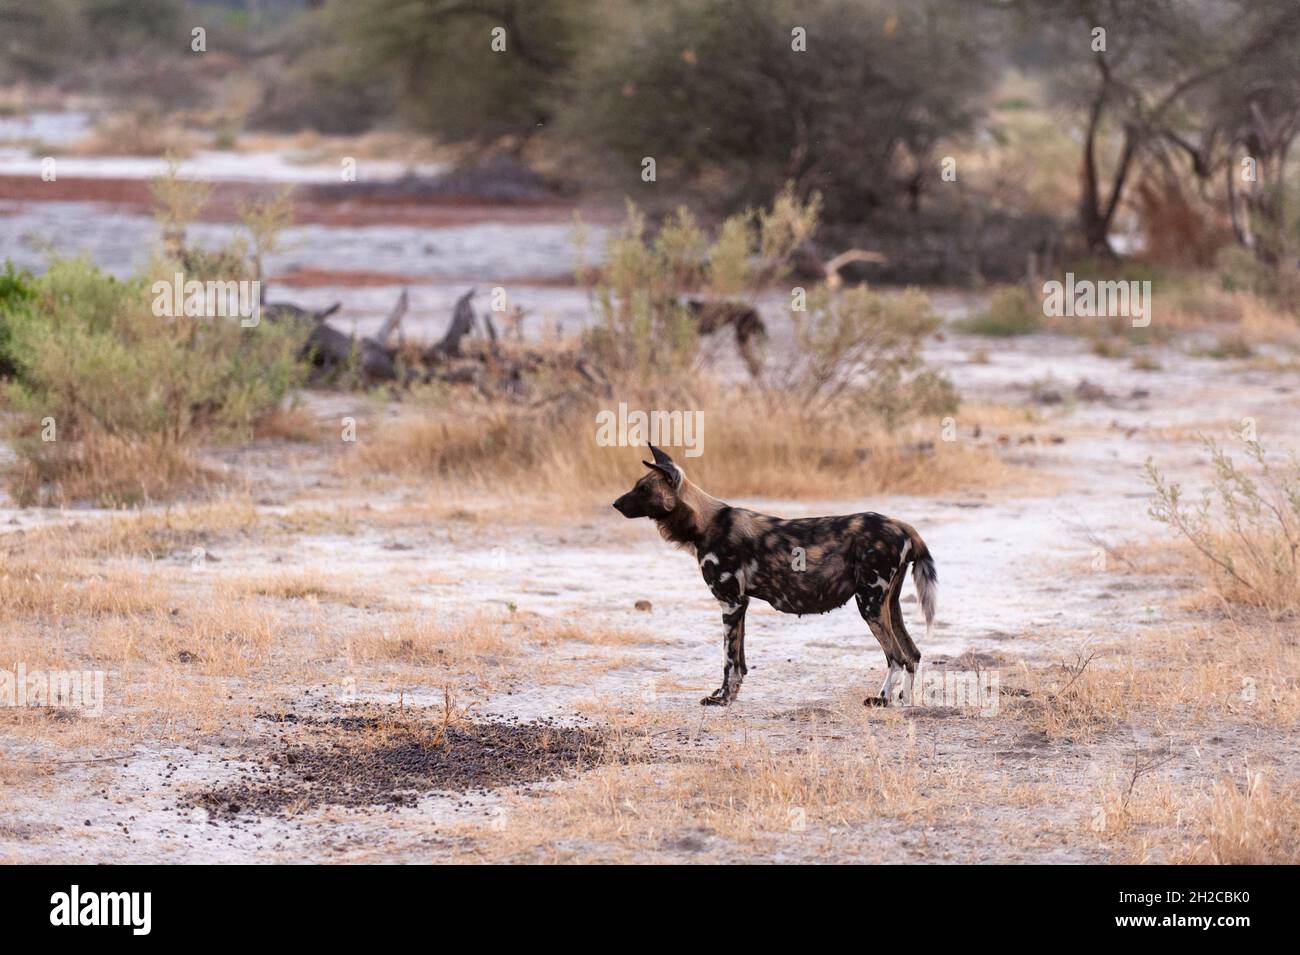 Three Cape hunting dogs or painted wolves, Lycaon pictus, hunting. Chief Island, Moremi Game Reserve, Okavango Delta, Botswana. Stock Photo